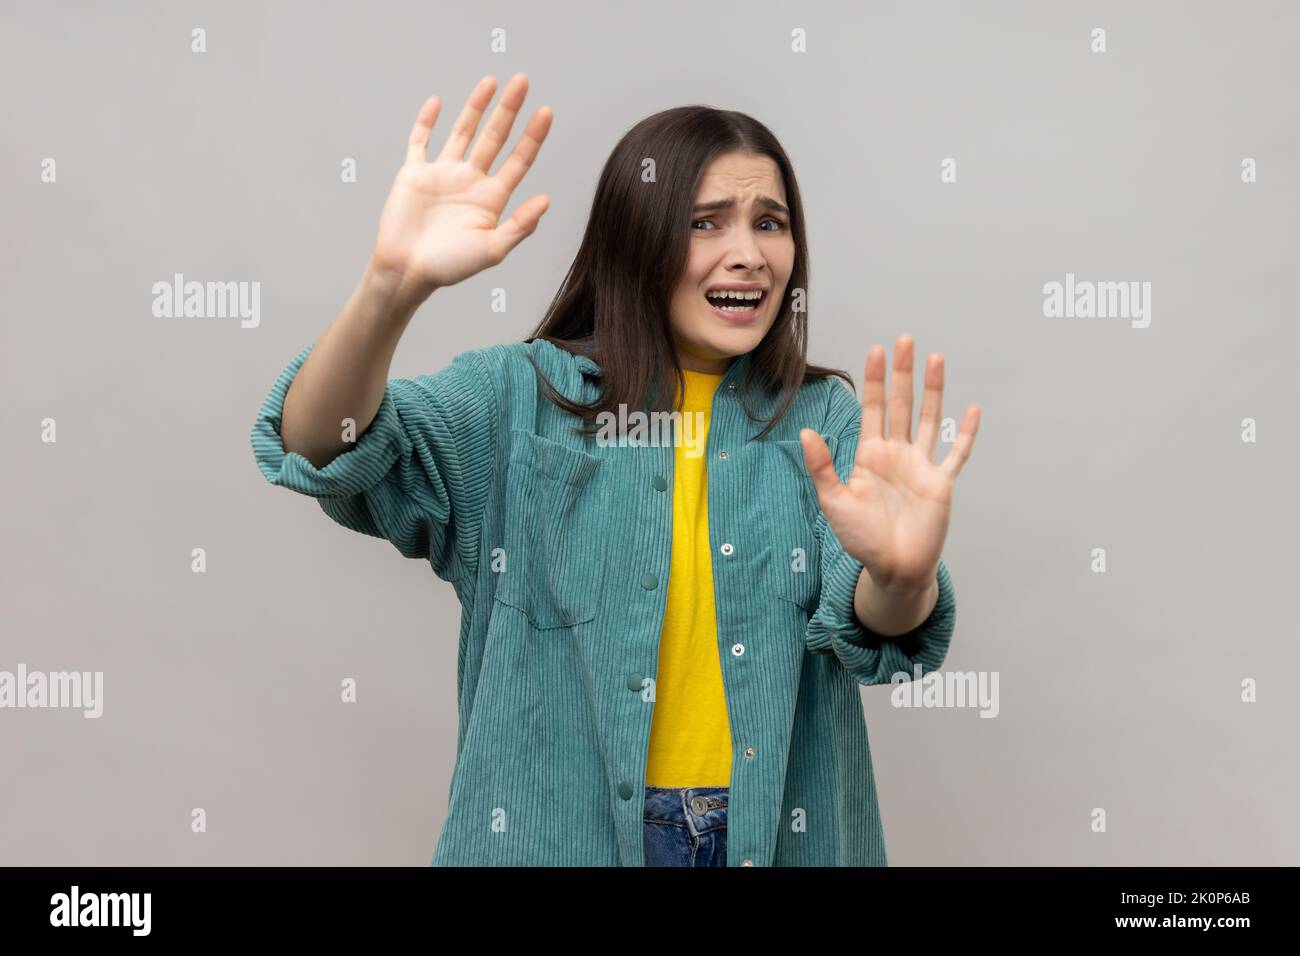 Portrait of scared young adult dark haired woman gesturing stop with palms and looking surprised with frightened eyes, wearing casual style jacket. Indoor studio shot isolated on gray background. Stock Photo